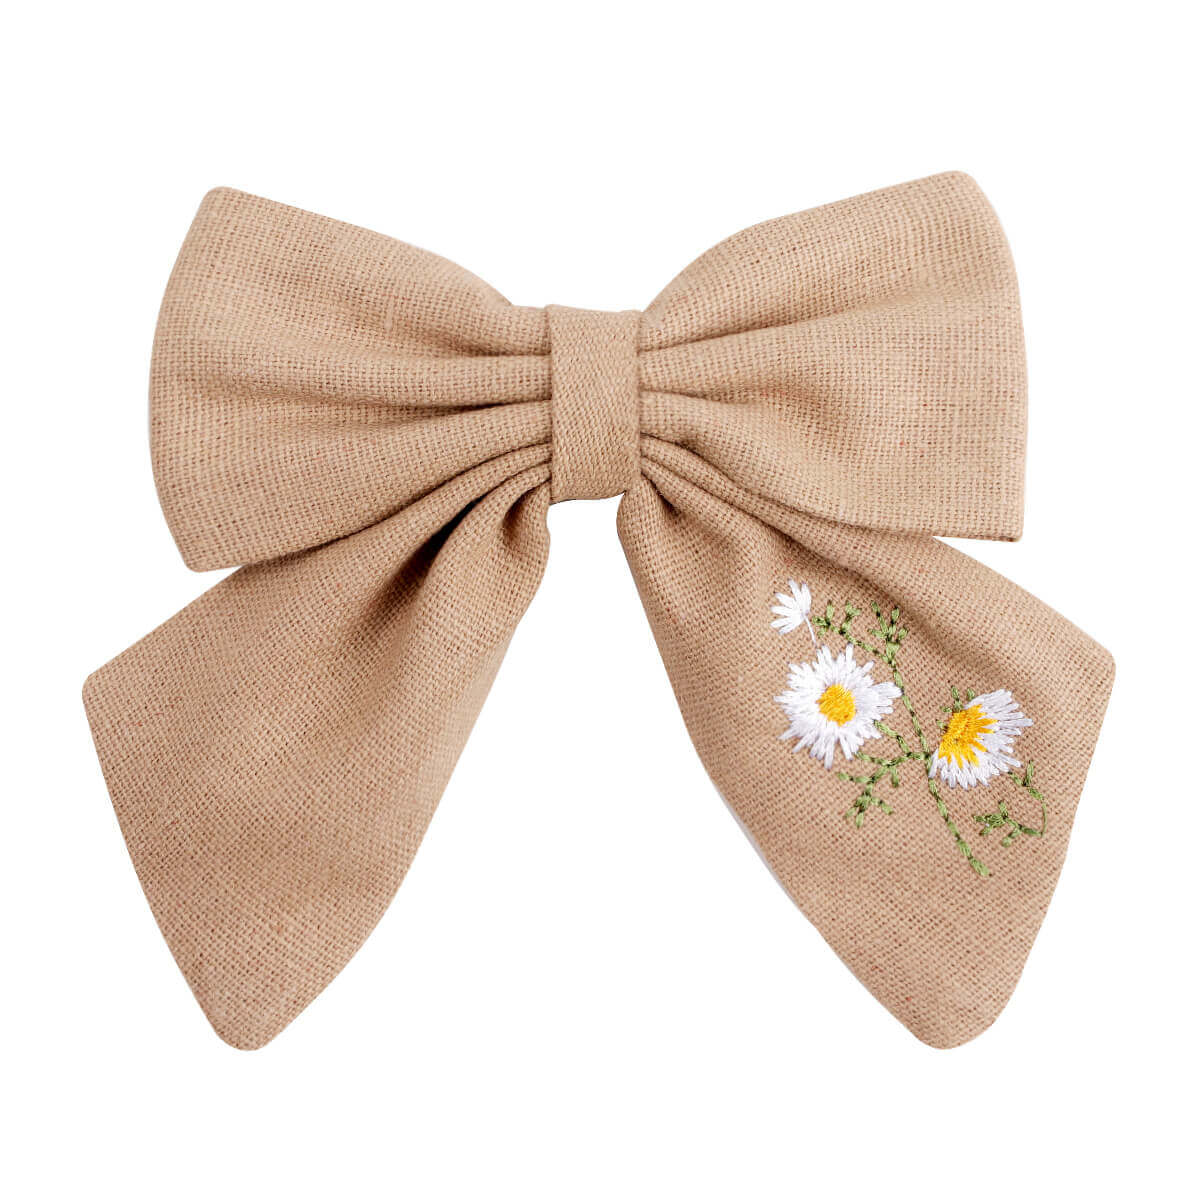 5'' Embroidery Flower Hair Bows